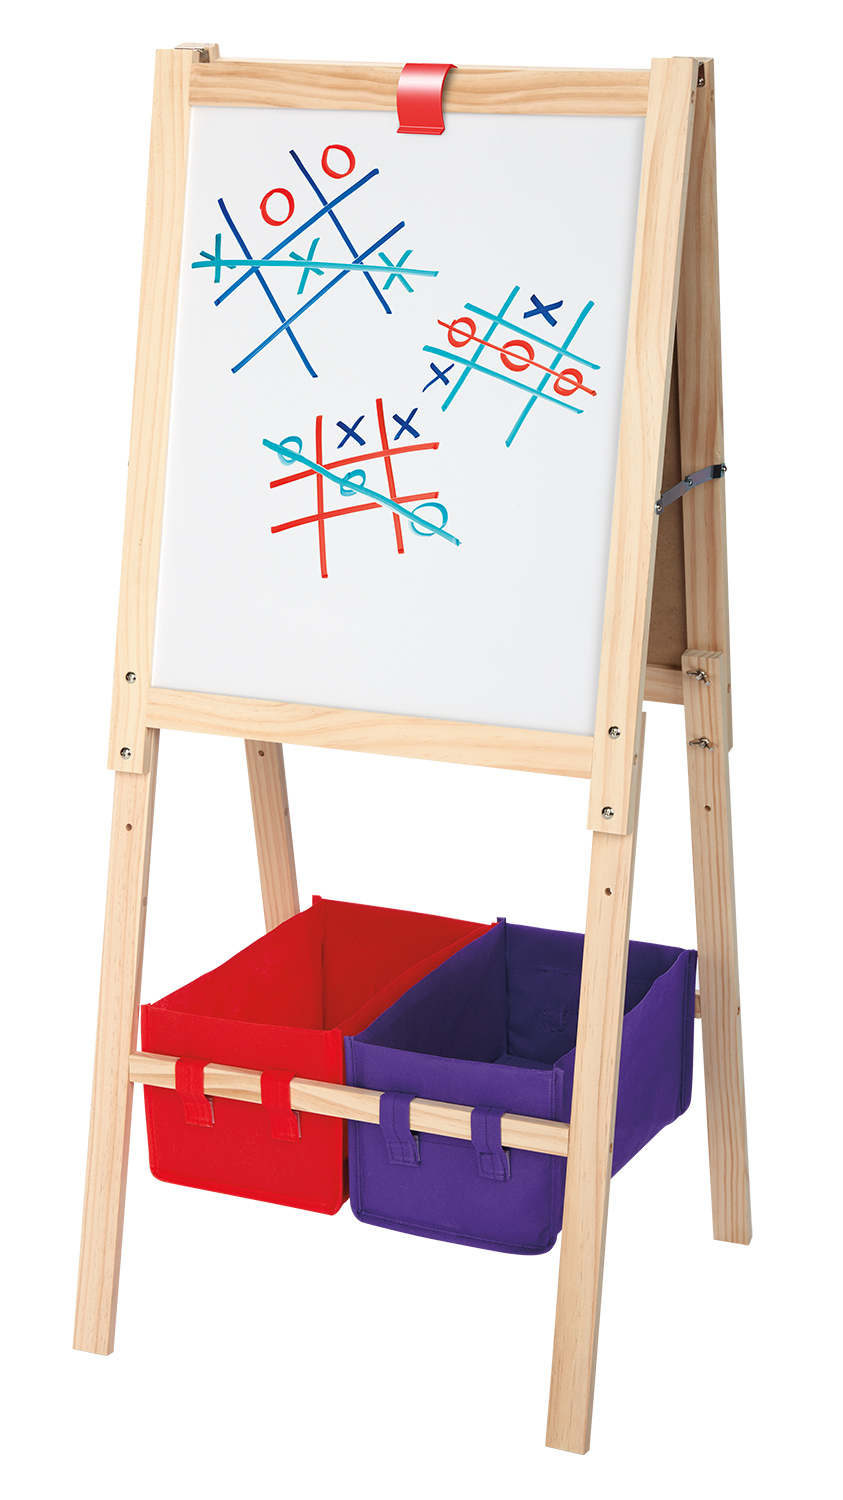 Cra-Z-Art 37"- 43" Double-Sided Wood Children's Art Easel, Child Ages 4 and up - image 5 of 9